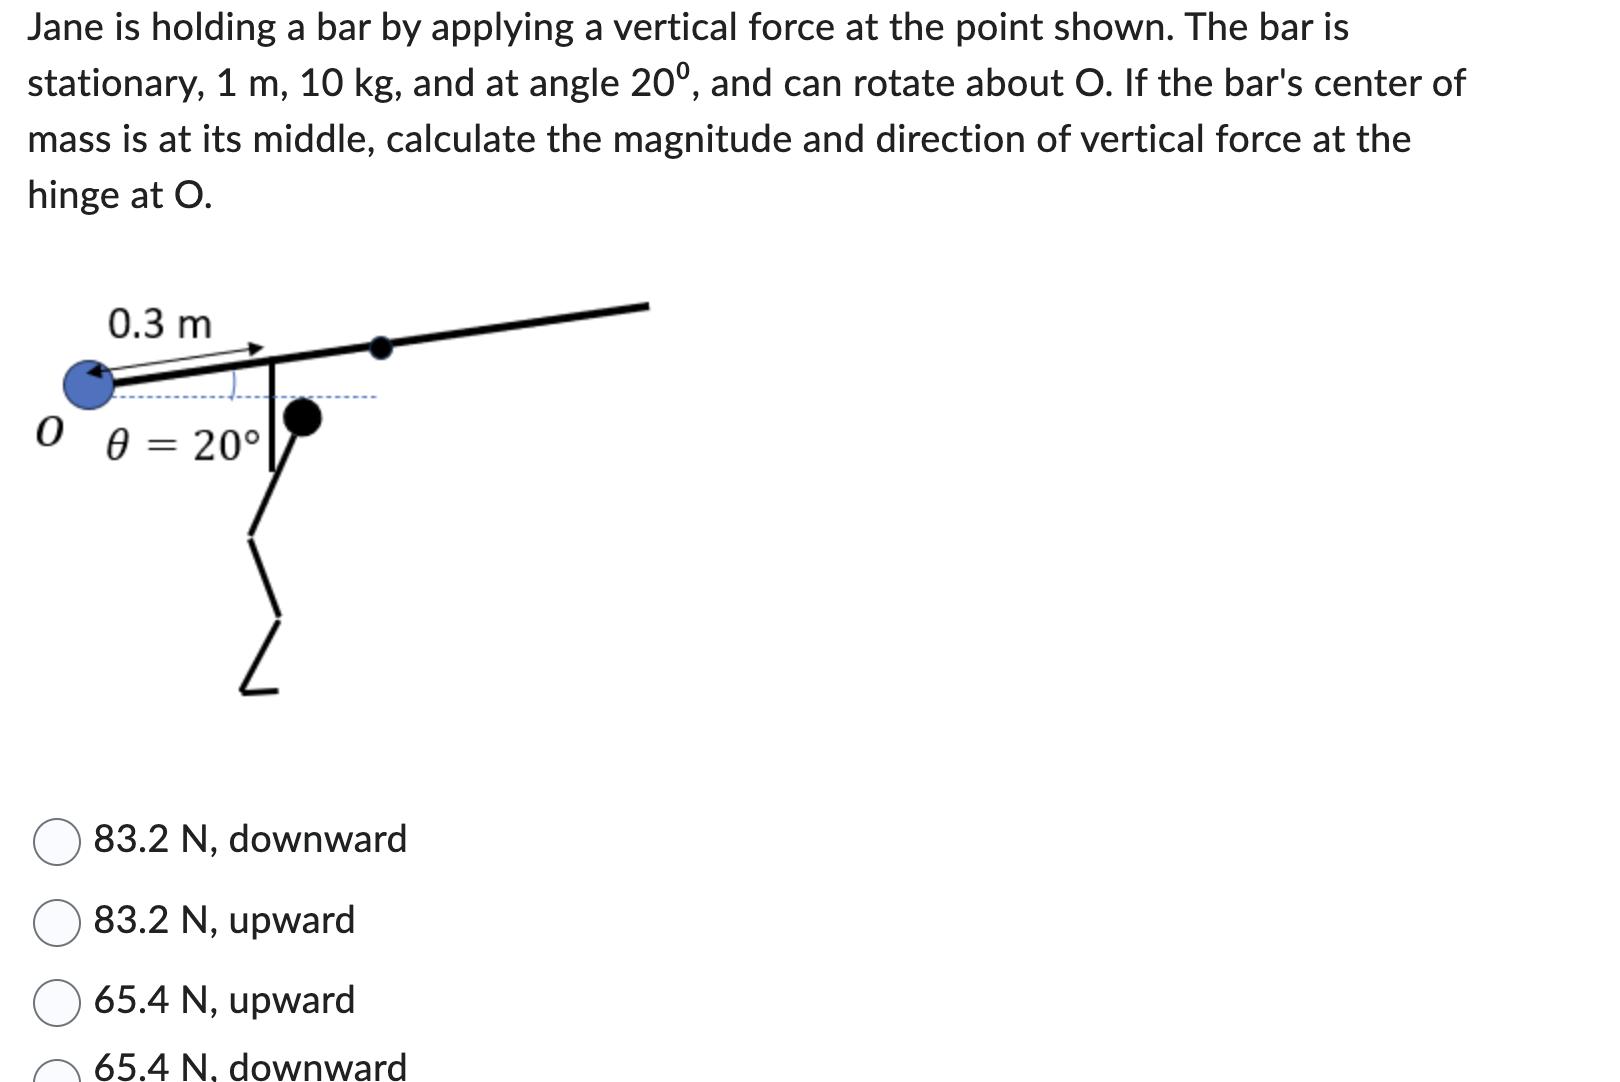 Jane is holding a bar by applying a vertical force at the point shown. The bar is stationary, 1 m, 10 kg, and